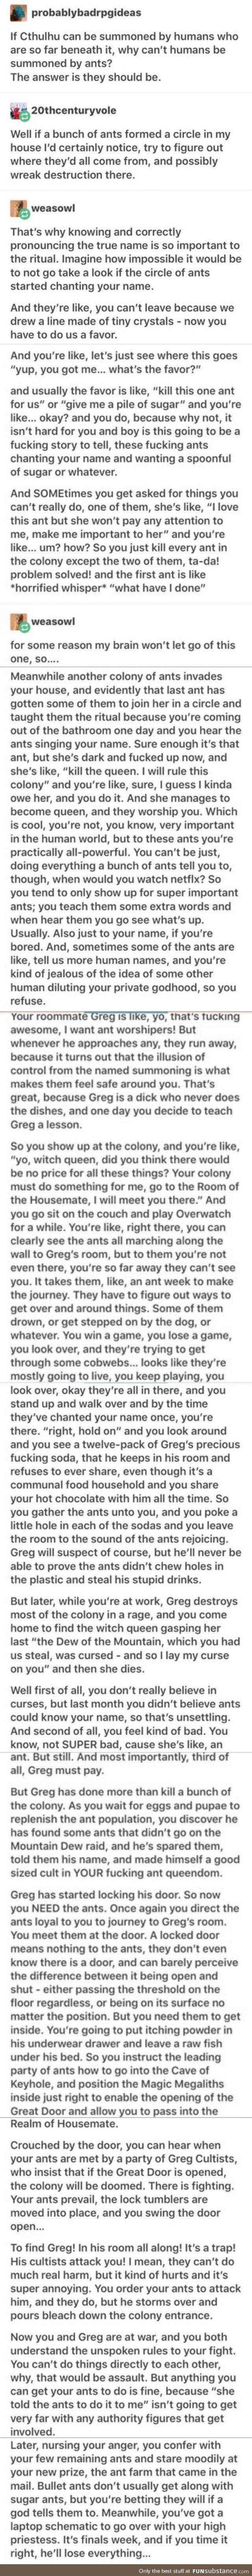 If Ants Could Summon Humans